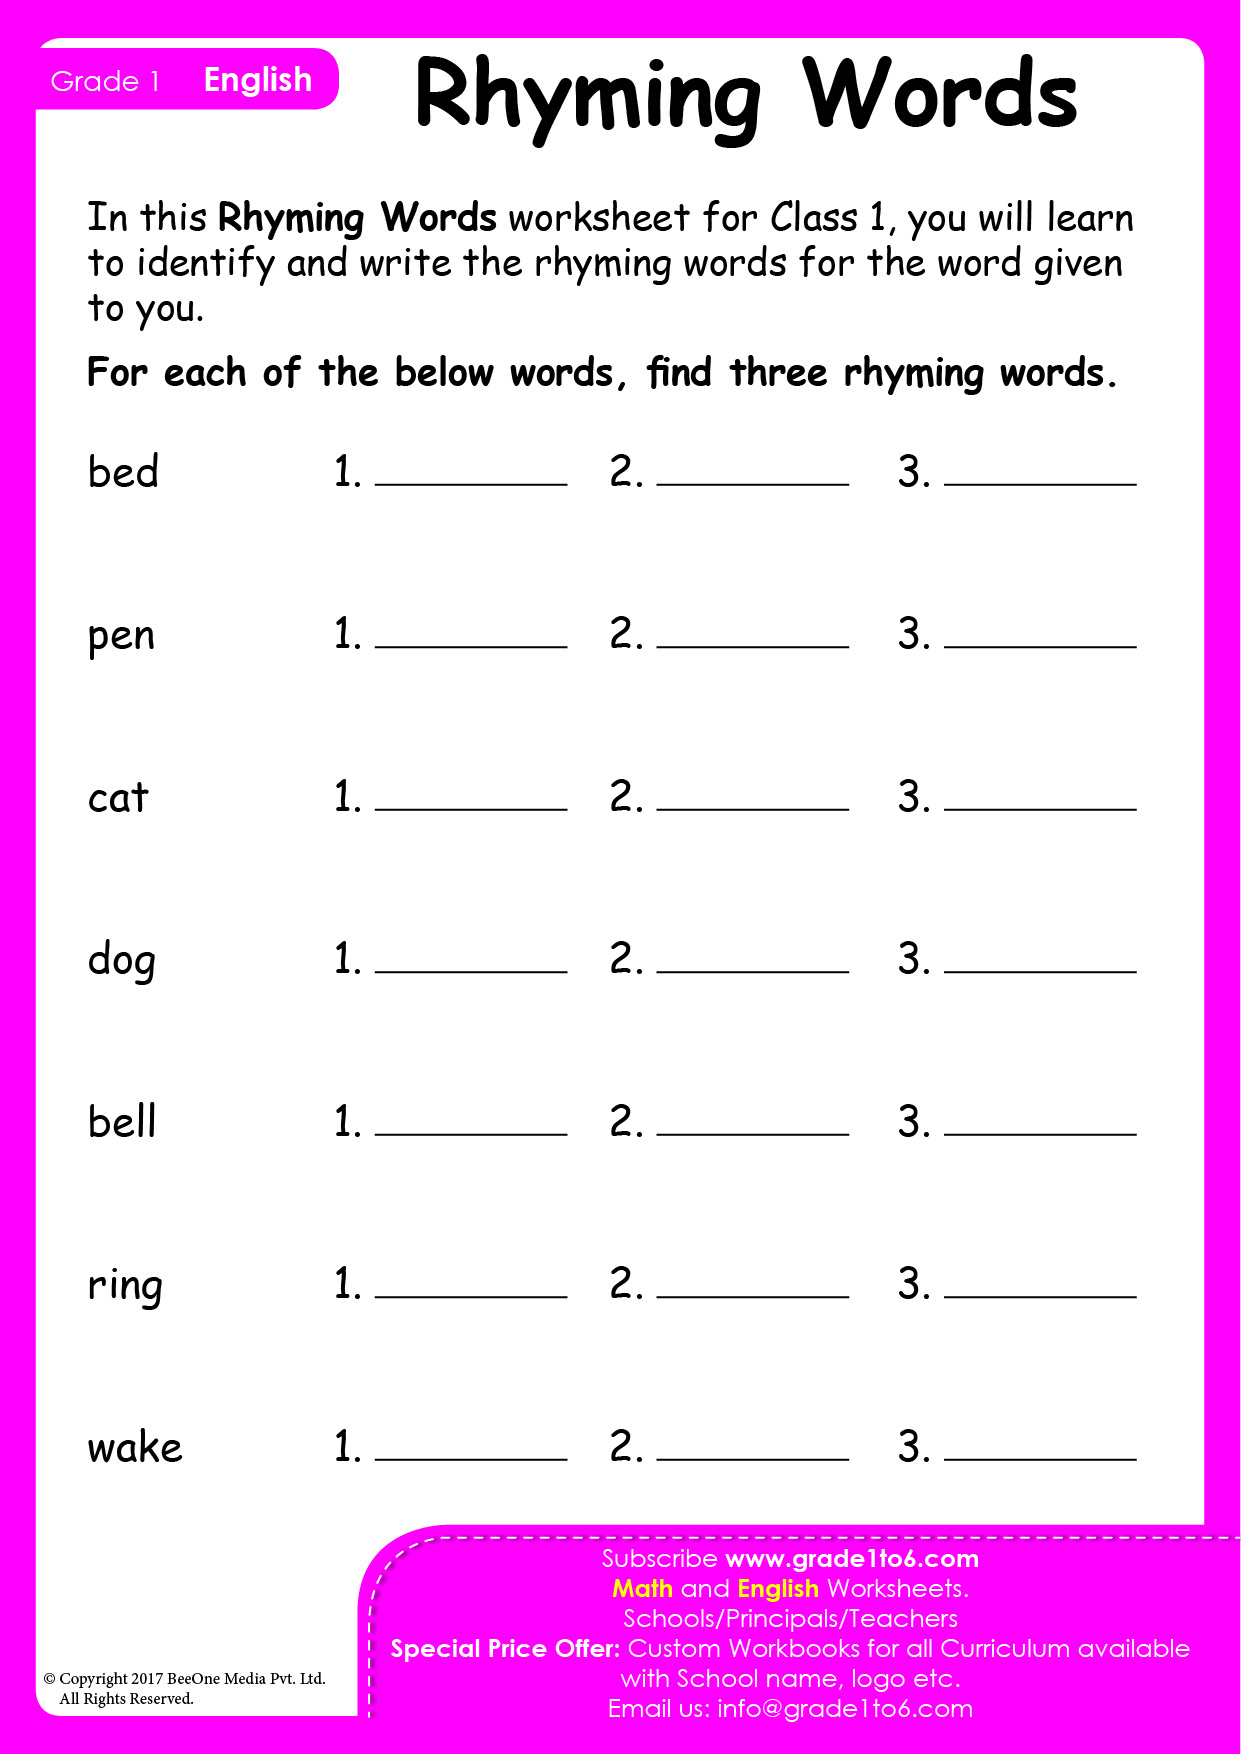 rhyming-words-for-class-1-grade1to6